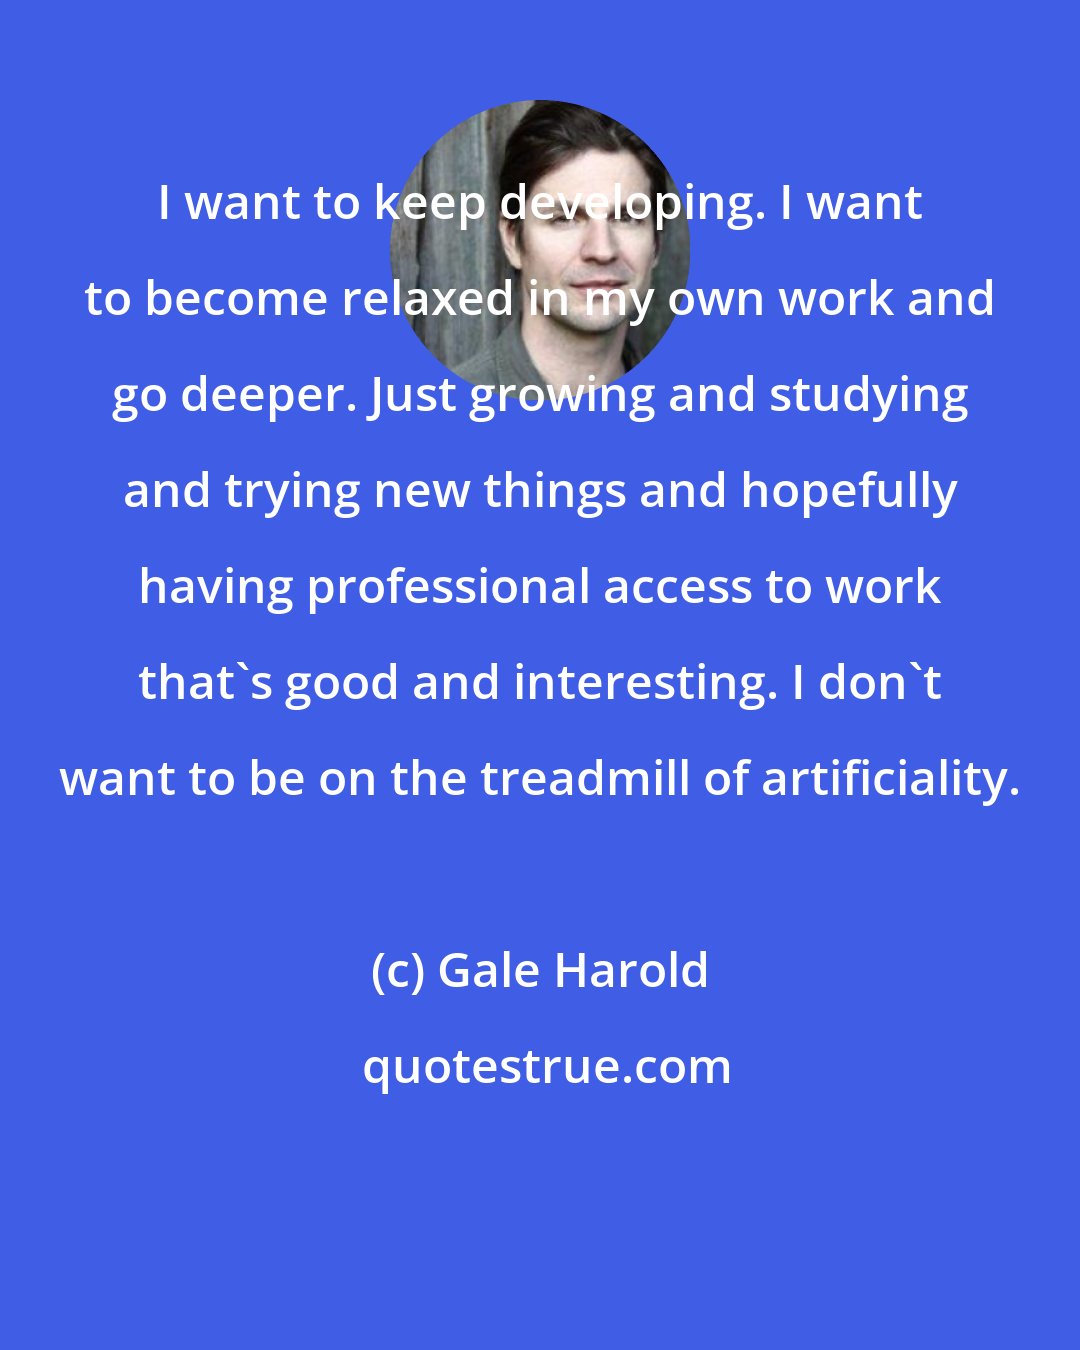 Gale Harold: I want to keep developing. I want to become relaxed in my own work and go deeper. Just growing and studying and trying new things and hopefully having professional access to work that's good and interesting. I don't want to be on the treadmill of artificiality.